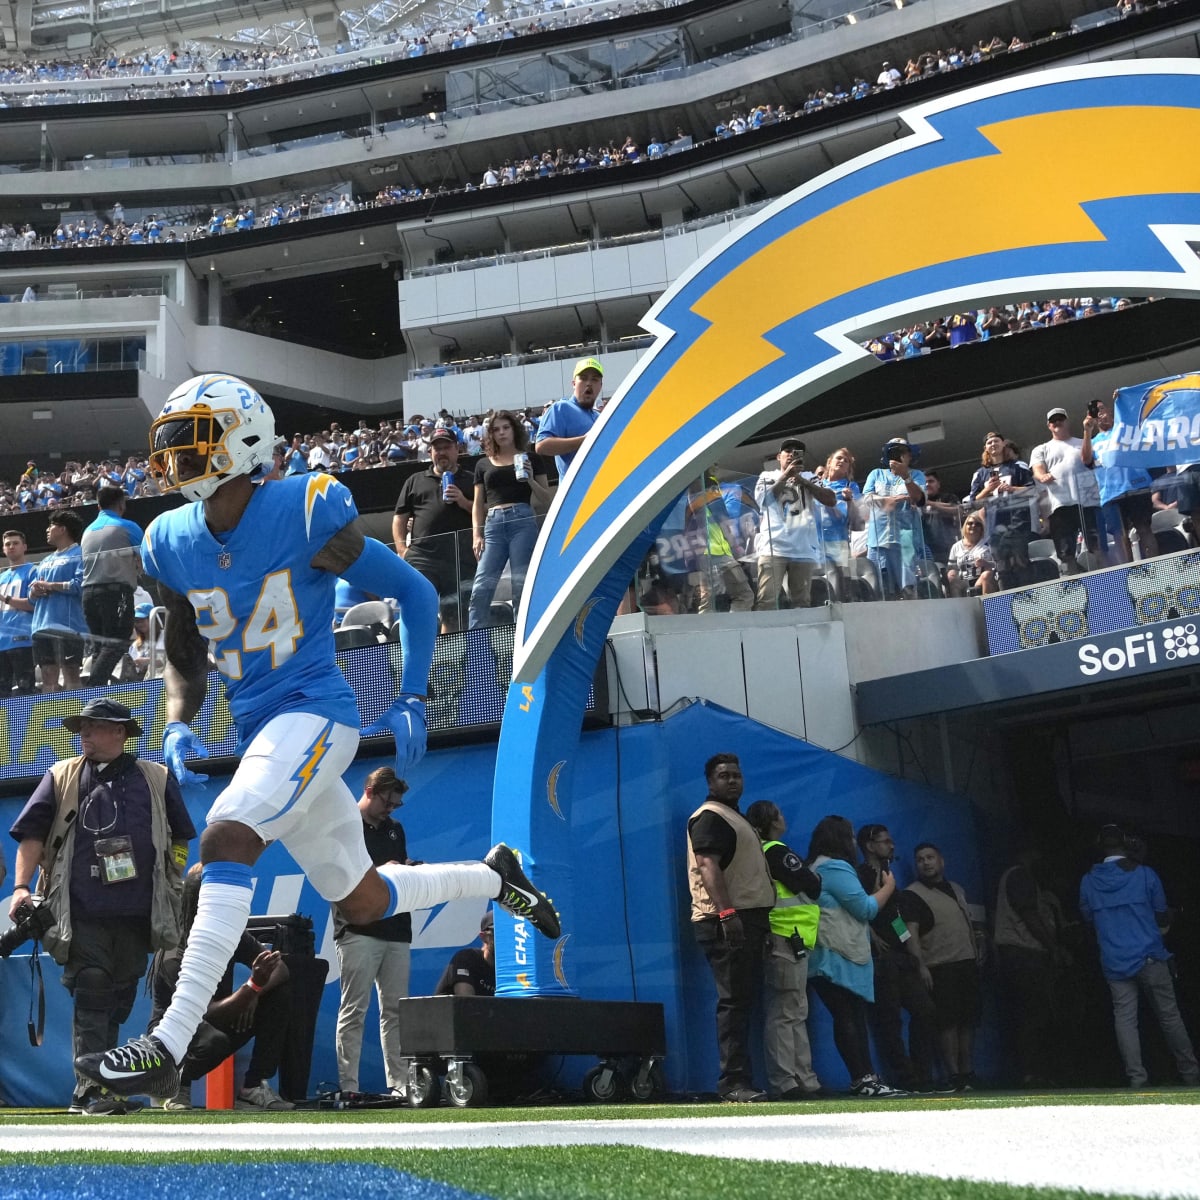 Chargers safety Nasir Adderley, just 25, announces he's done with